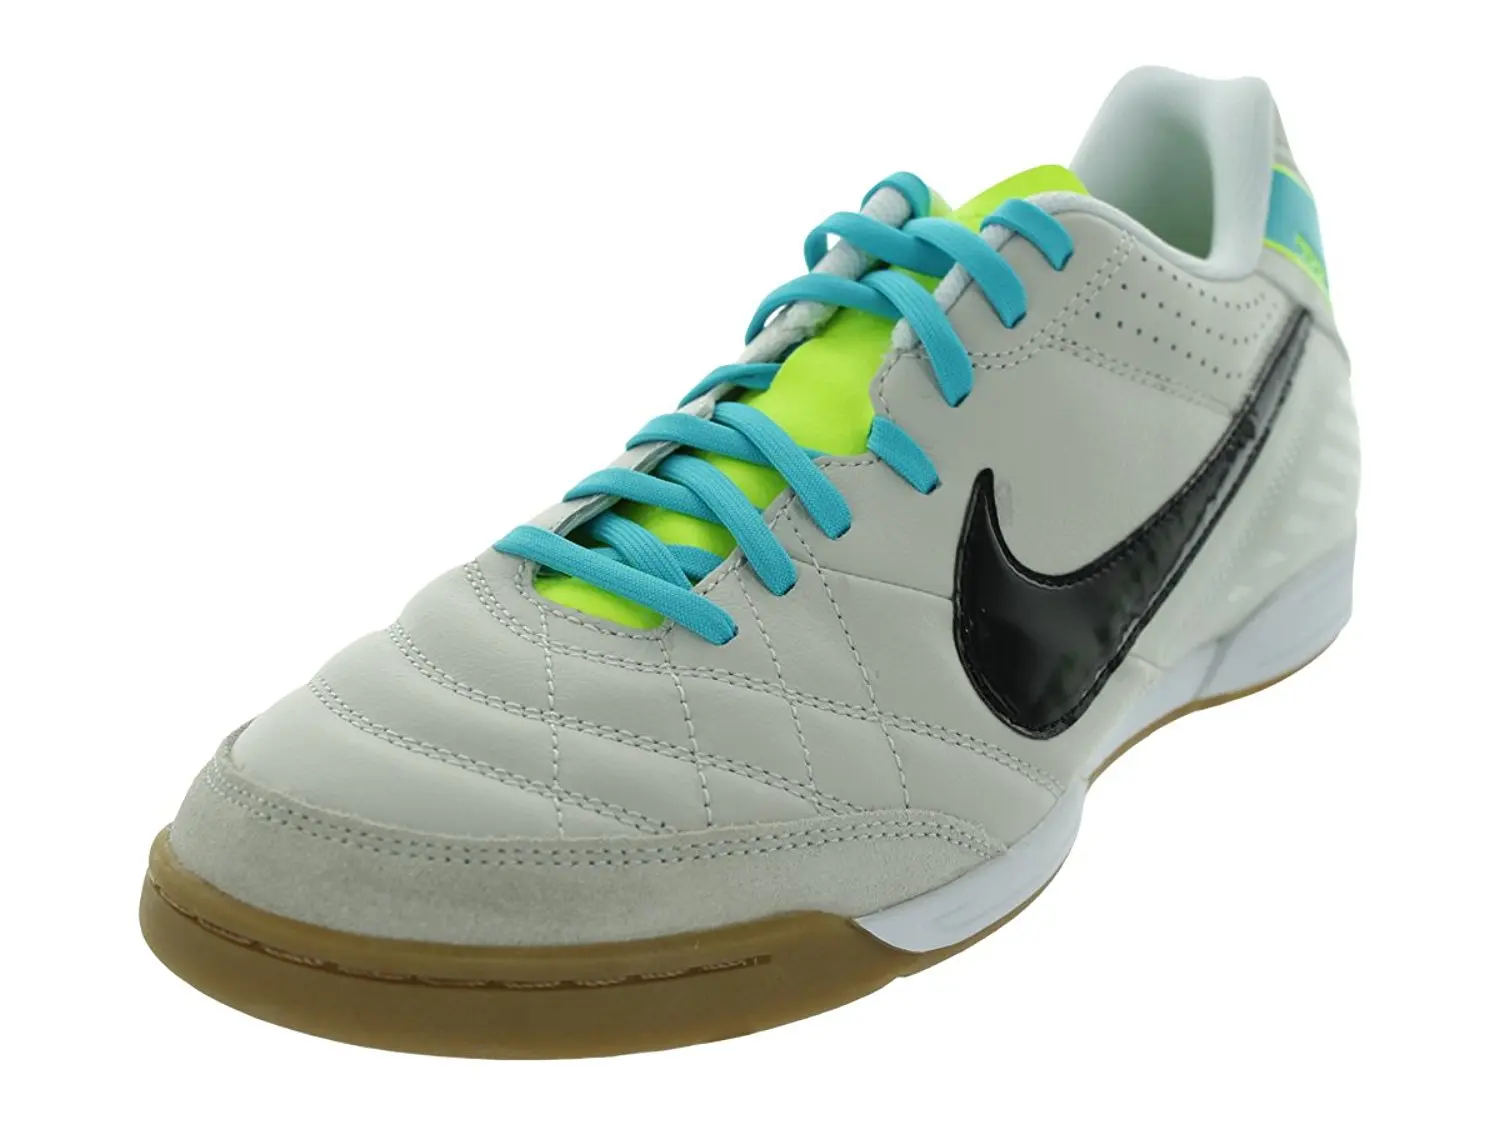 Cheap Nike Tiempo Indoor Soccer Shoes 